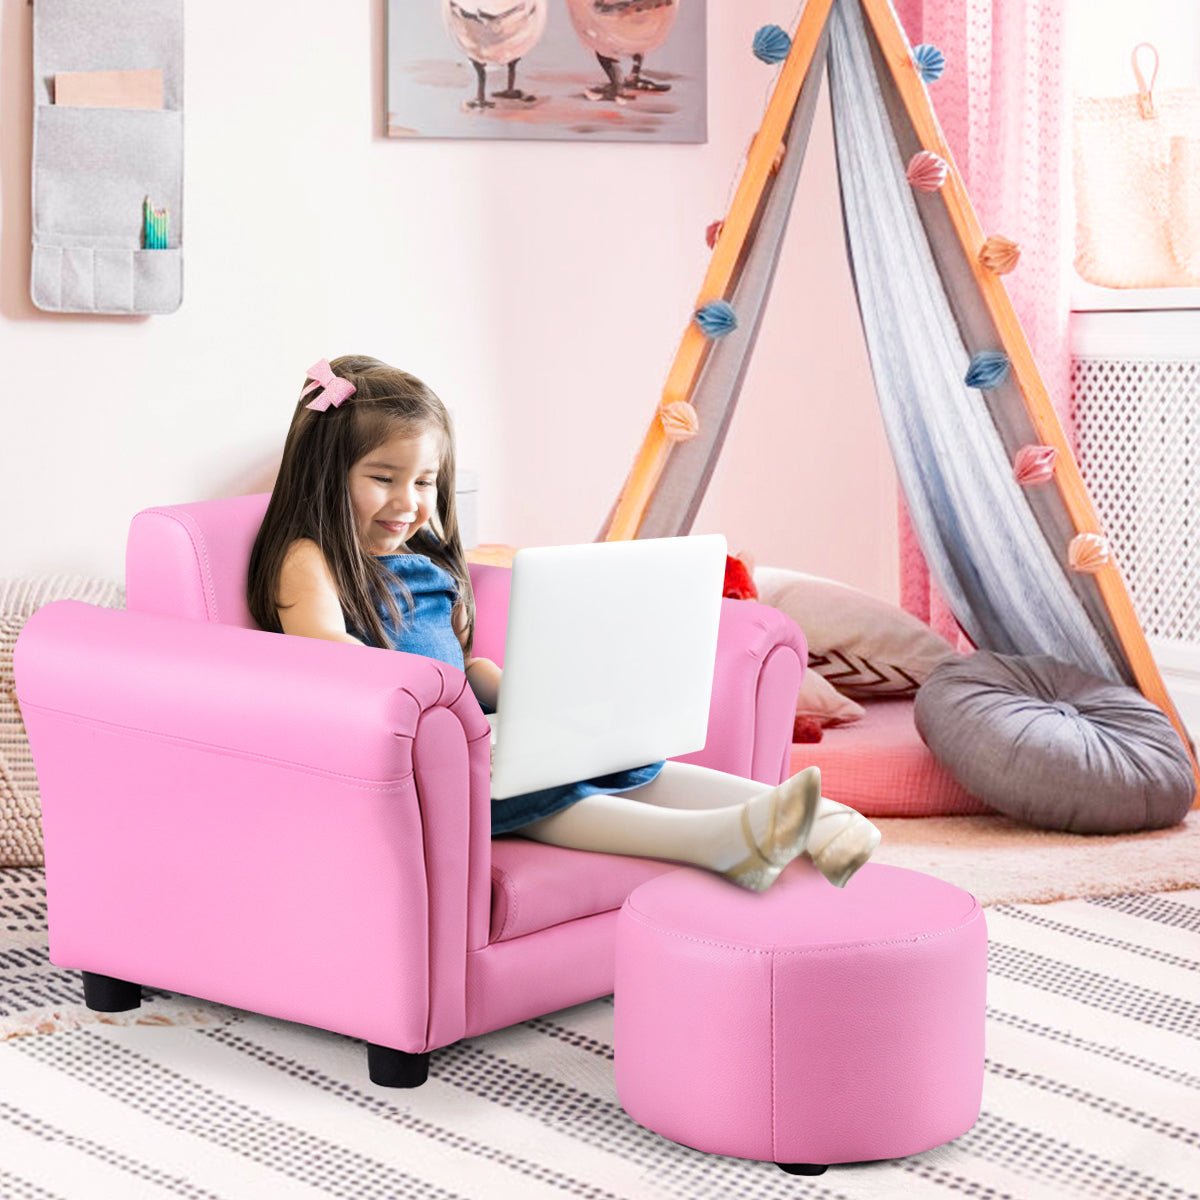 Ergonomic Seating for Babies and Children - Pink Sofa and Footstool